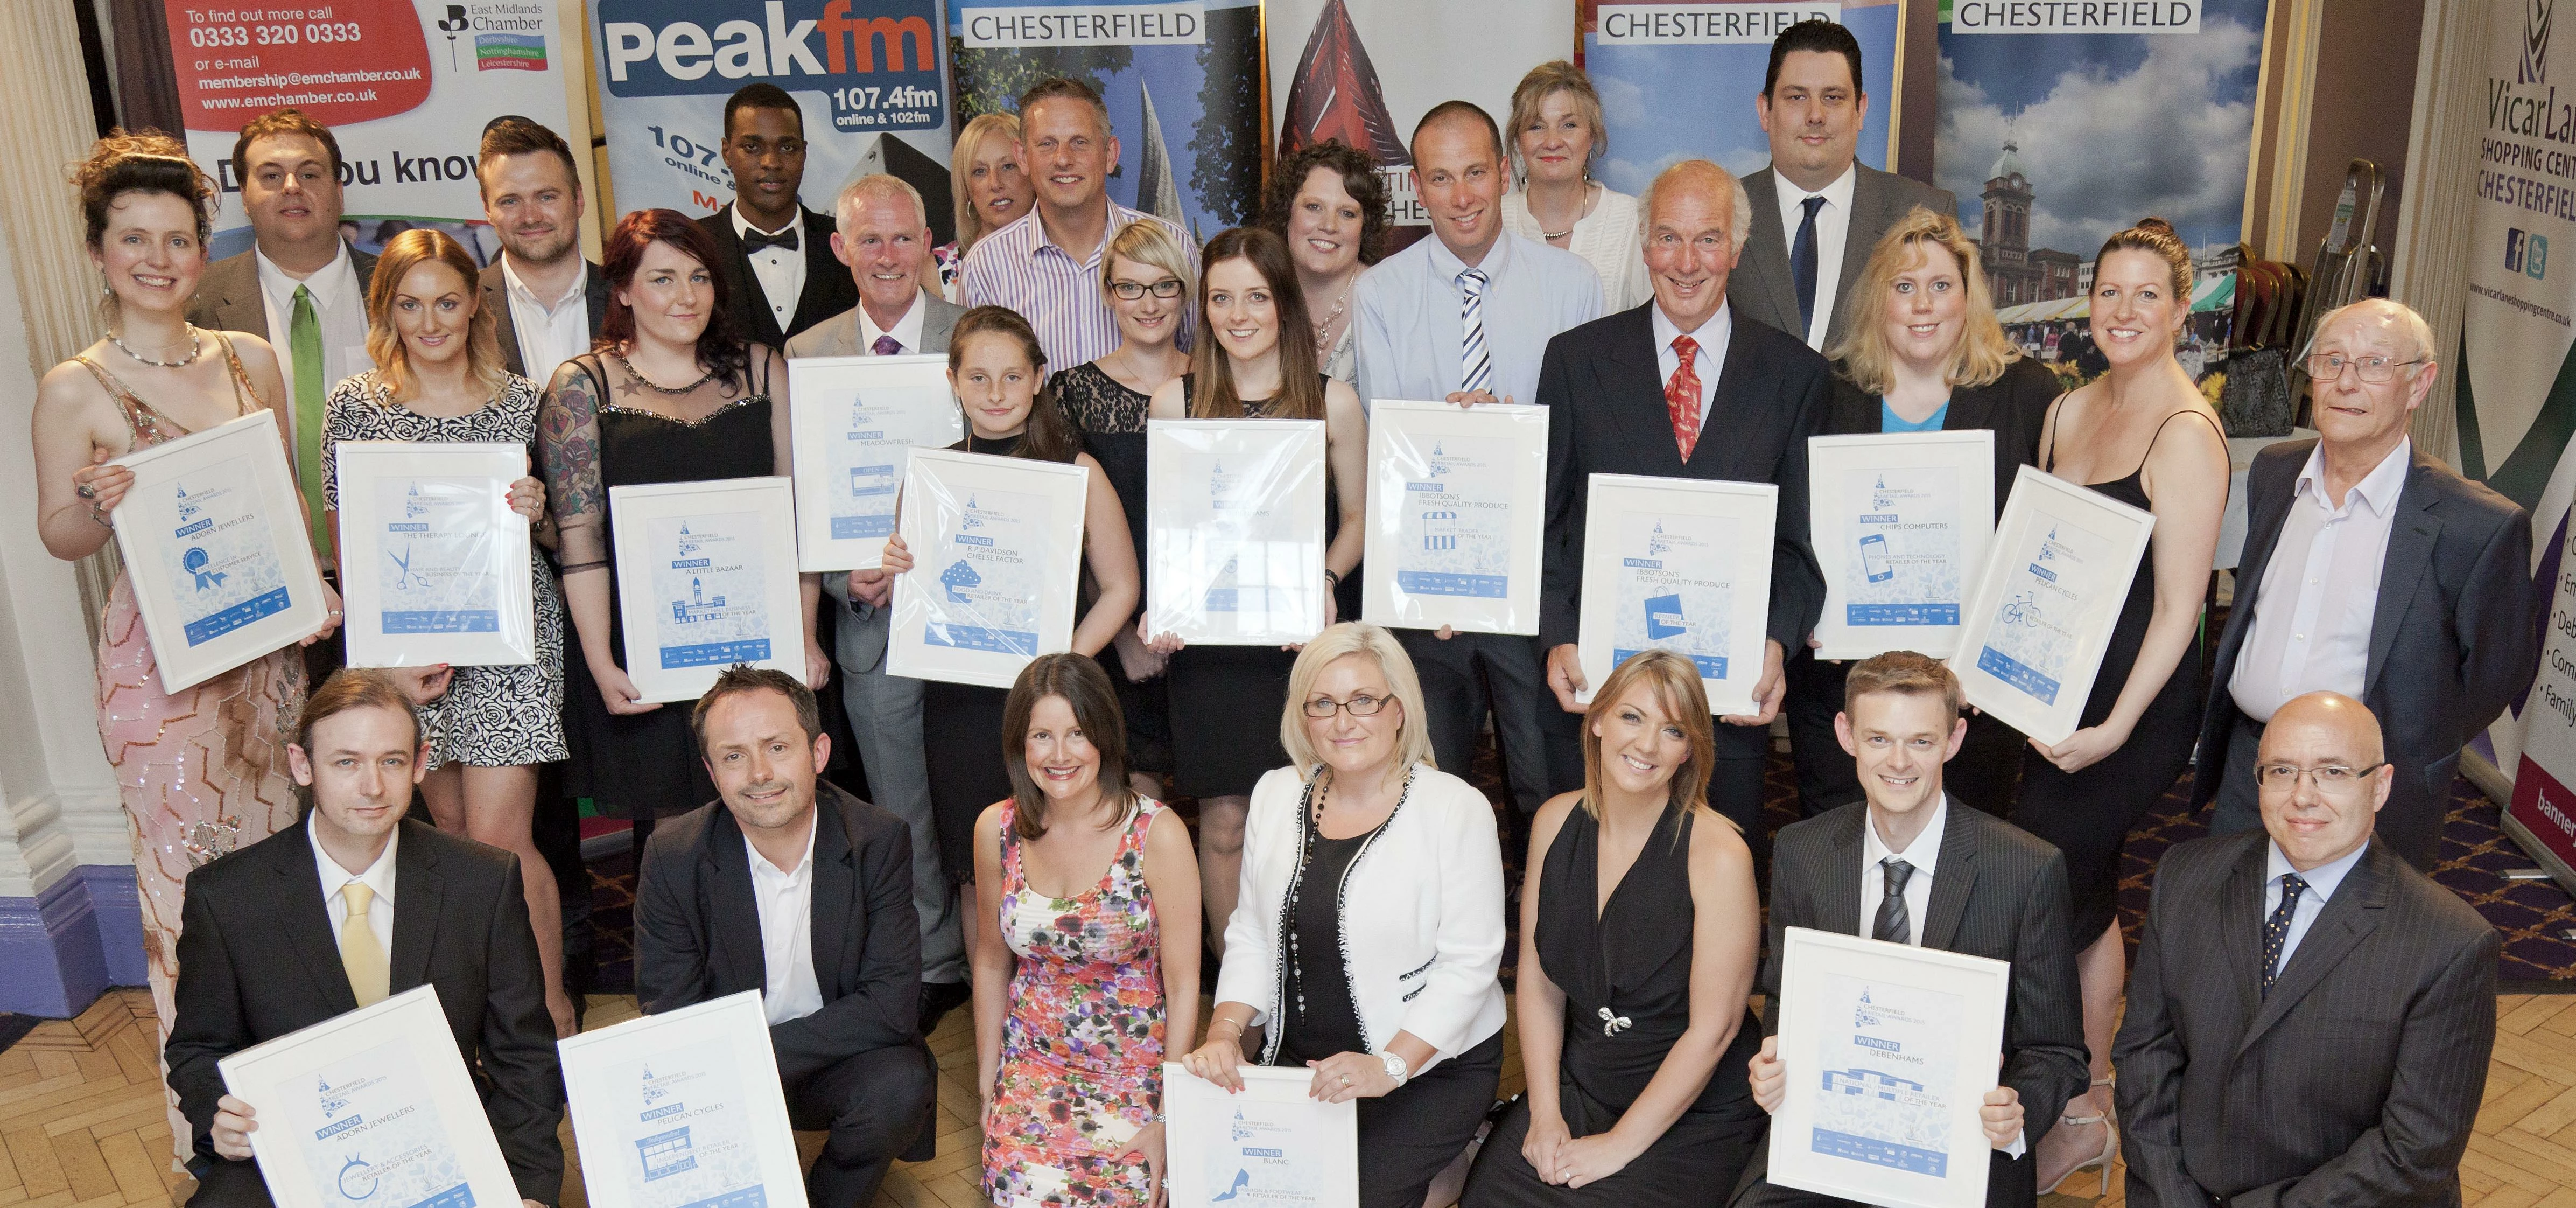 Winners at the 2015 Chesterfield Retail Awards